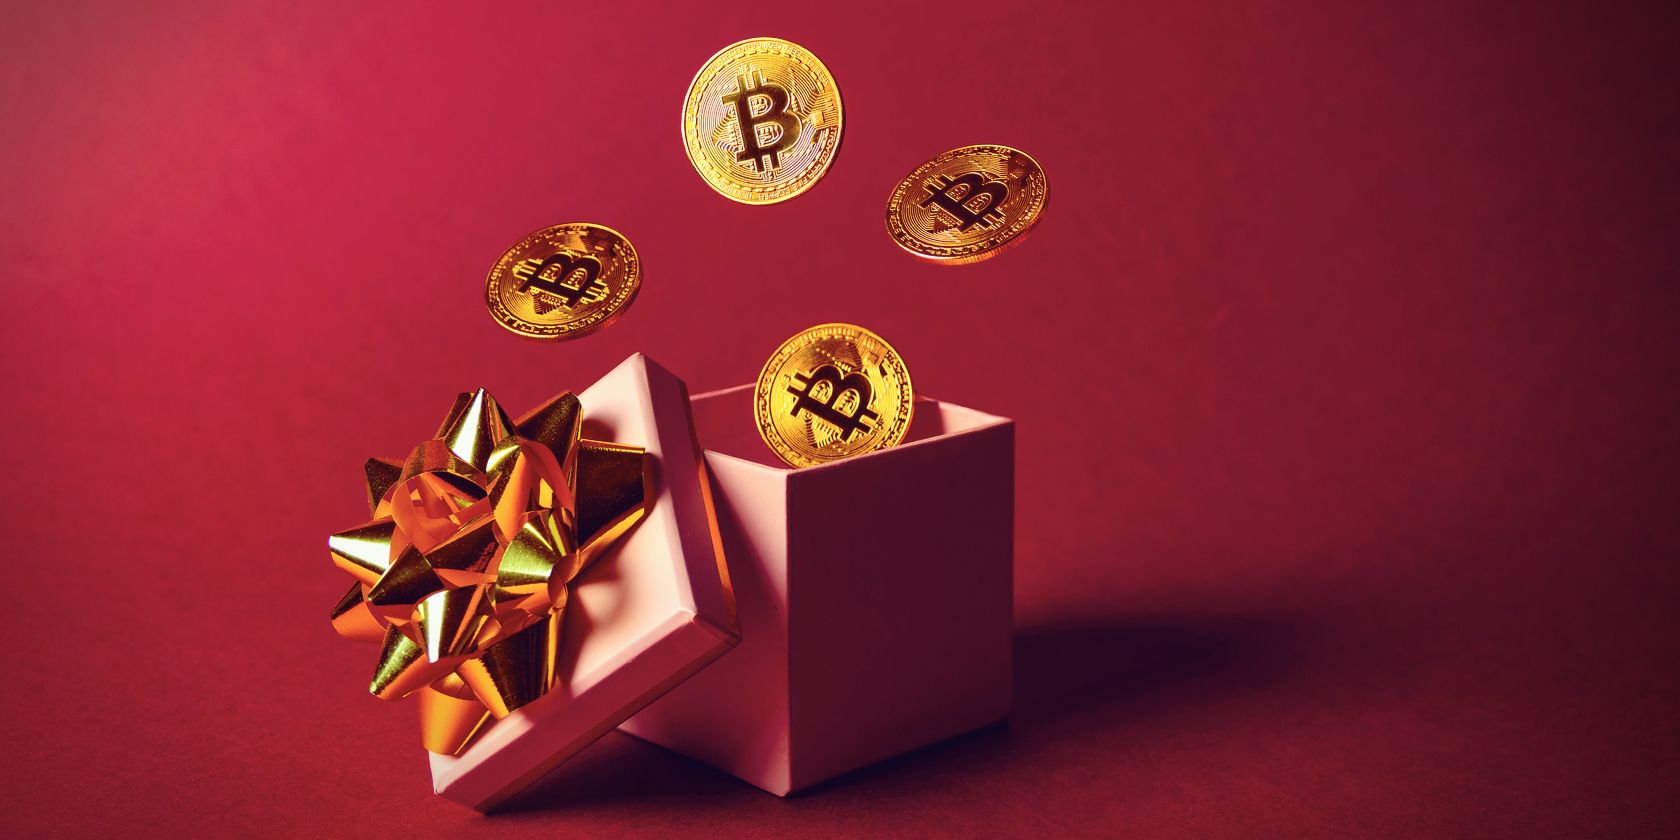 Binance Gift Cards arrive in Italy - The Cryptonomist